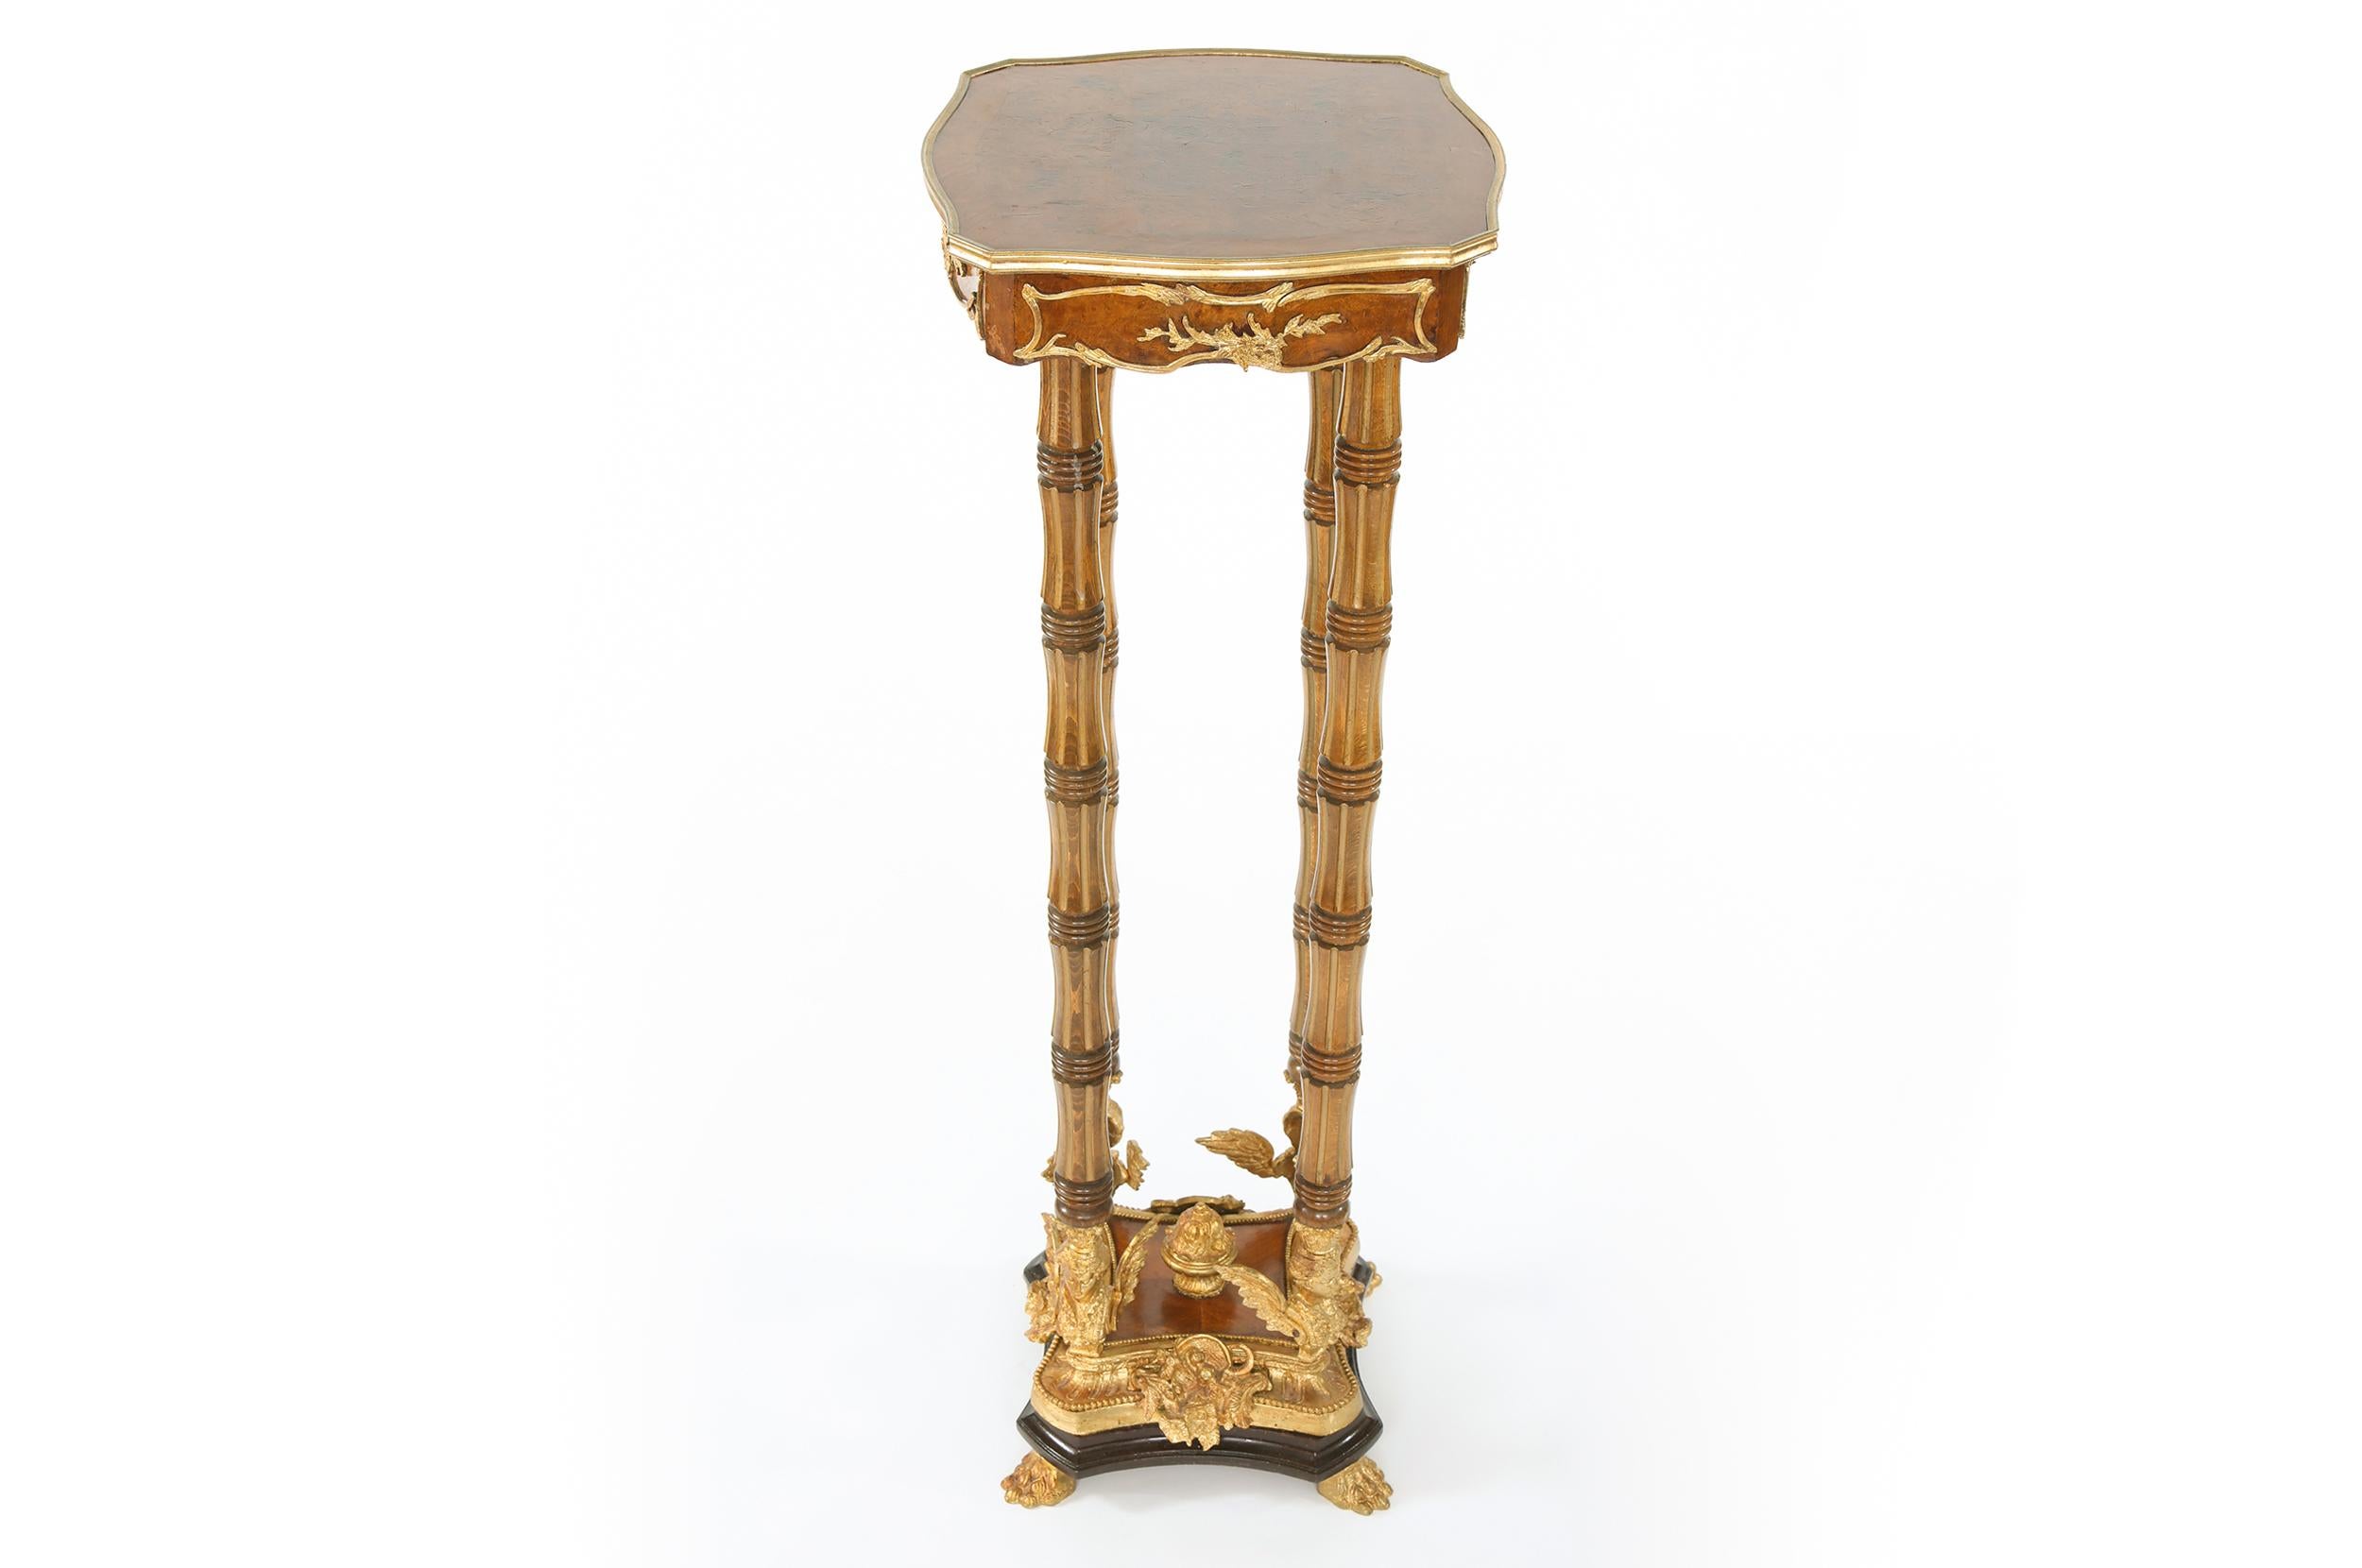 Ornately gilt bronze mounted and finely carved in the Renaissance style design fruitwood pedestal table. The pedestal is in great condition with minor wear consistent with age / use. The pedestal table stands about 51.5 inches tall x 18 inches x 18